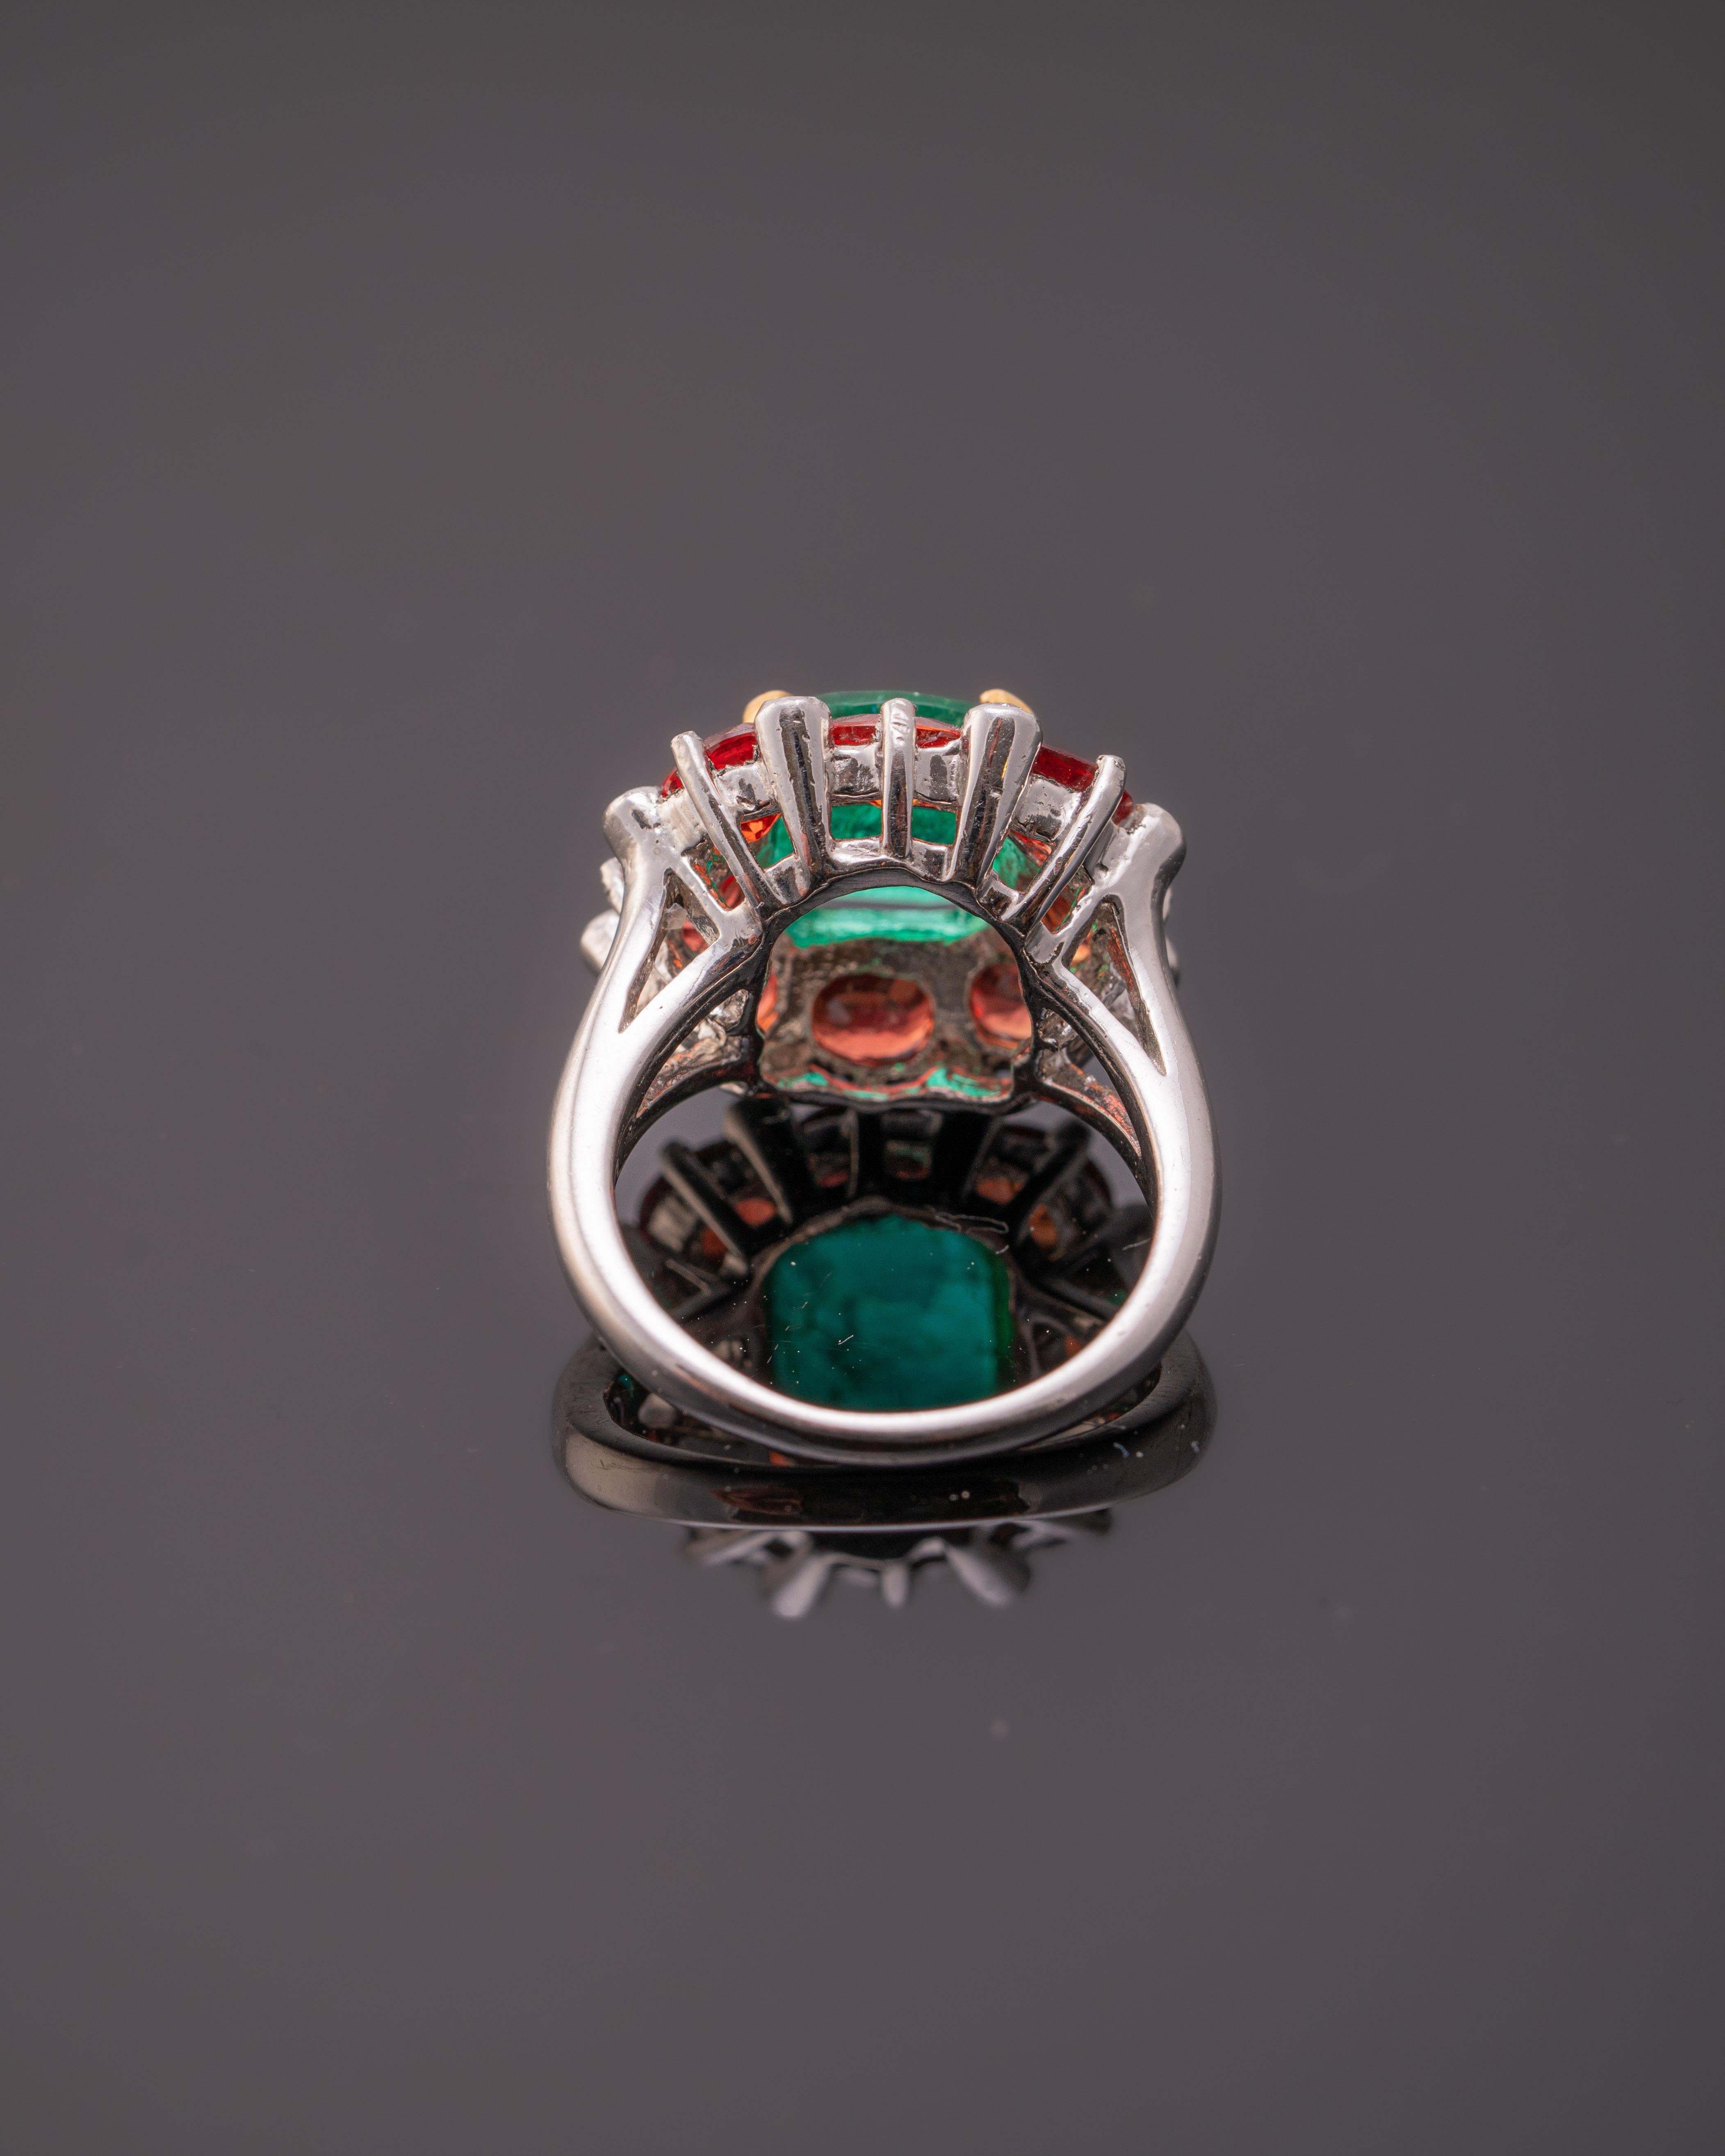 A beautiful combination of cushion shaped 2.33 carat Zambian Emerald and vivid 3.63 carat of oval Orange Sapphires, set with 0.14 carat White Diamonds in Platinum. The centre stone Emerald and sorrounding Orange Sapphire is absolutely transparent,